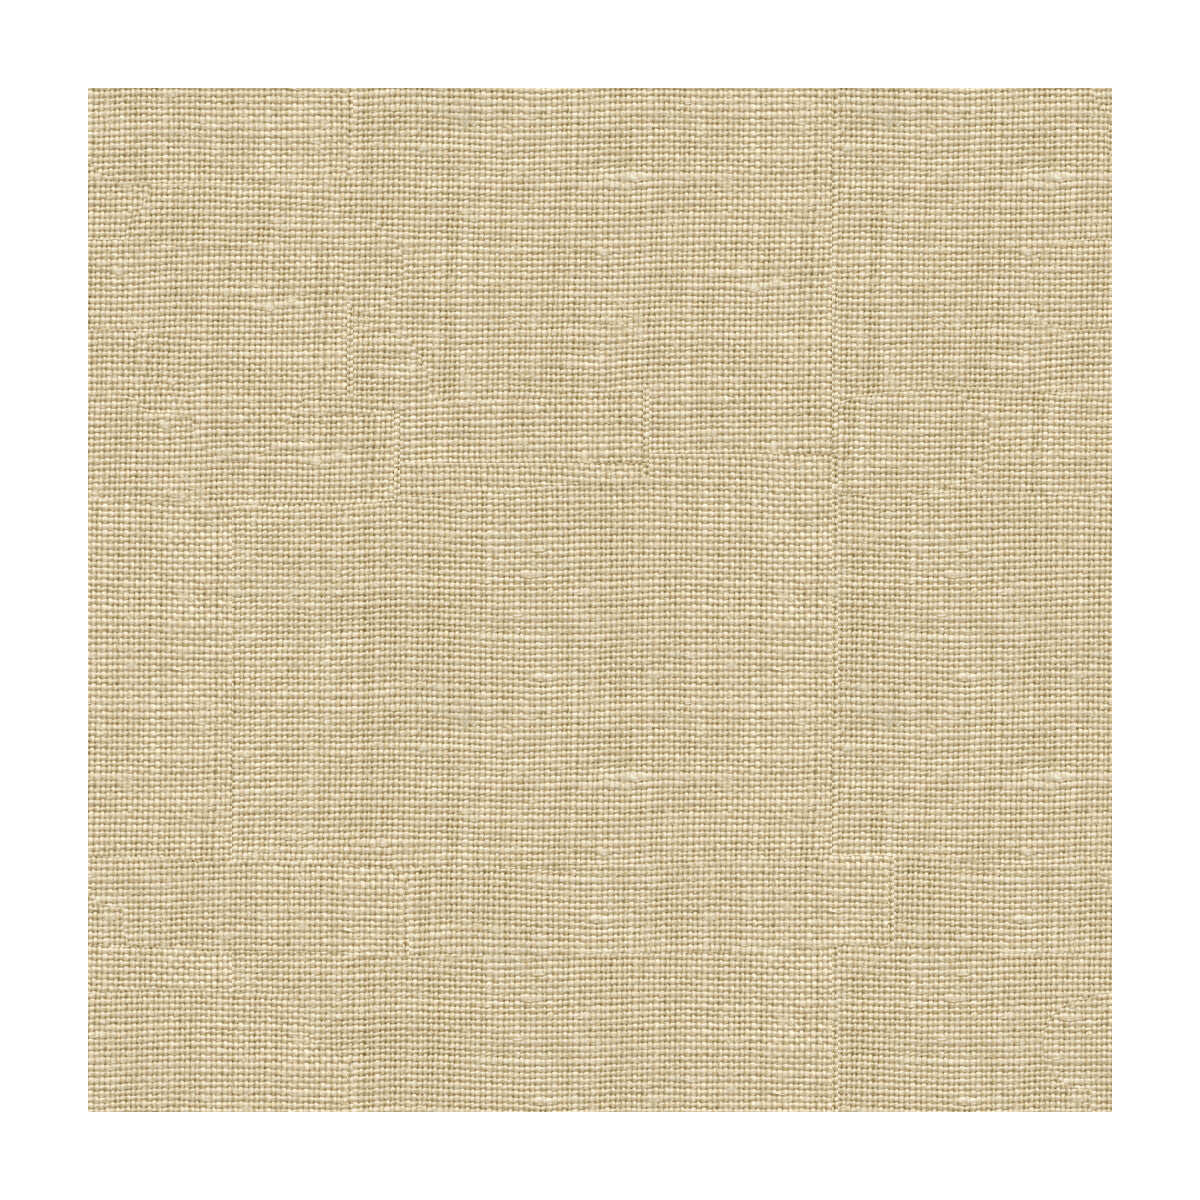 Kravet Basics fabric in 33767-116 color - pattern 33767.116.0 - by Kravet Basics in the Perfect Plains collection